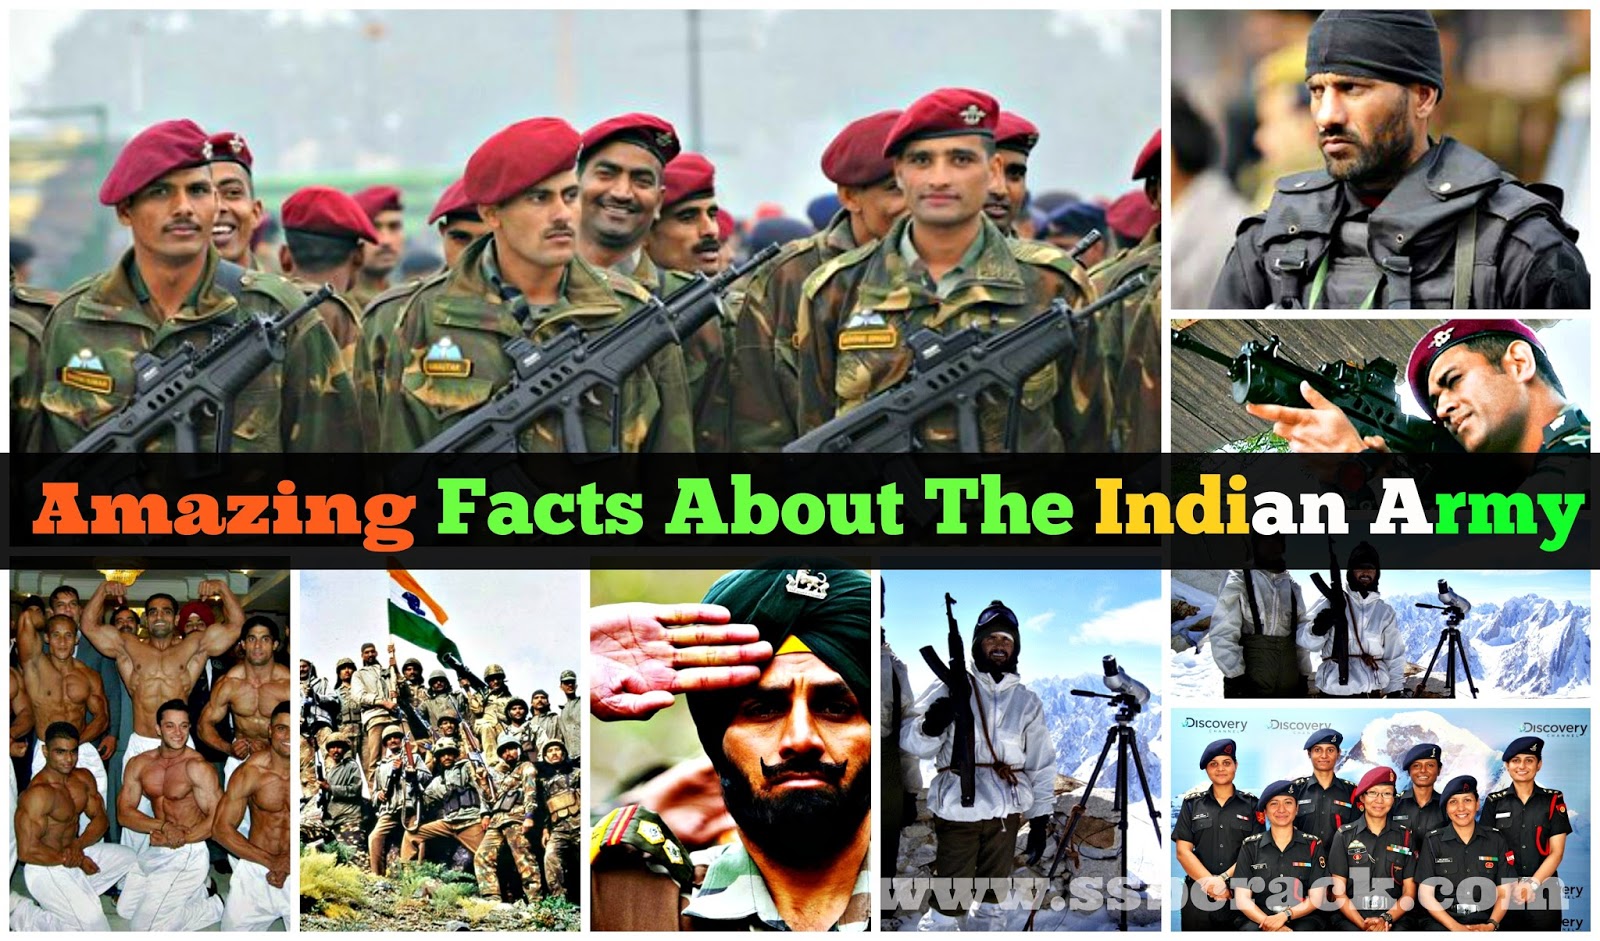 Amazing Facts About The Indian Army